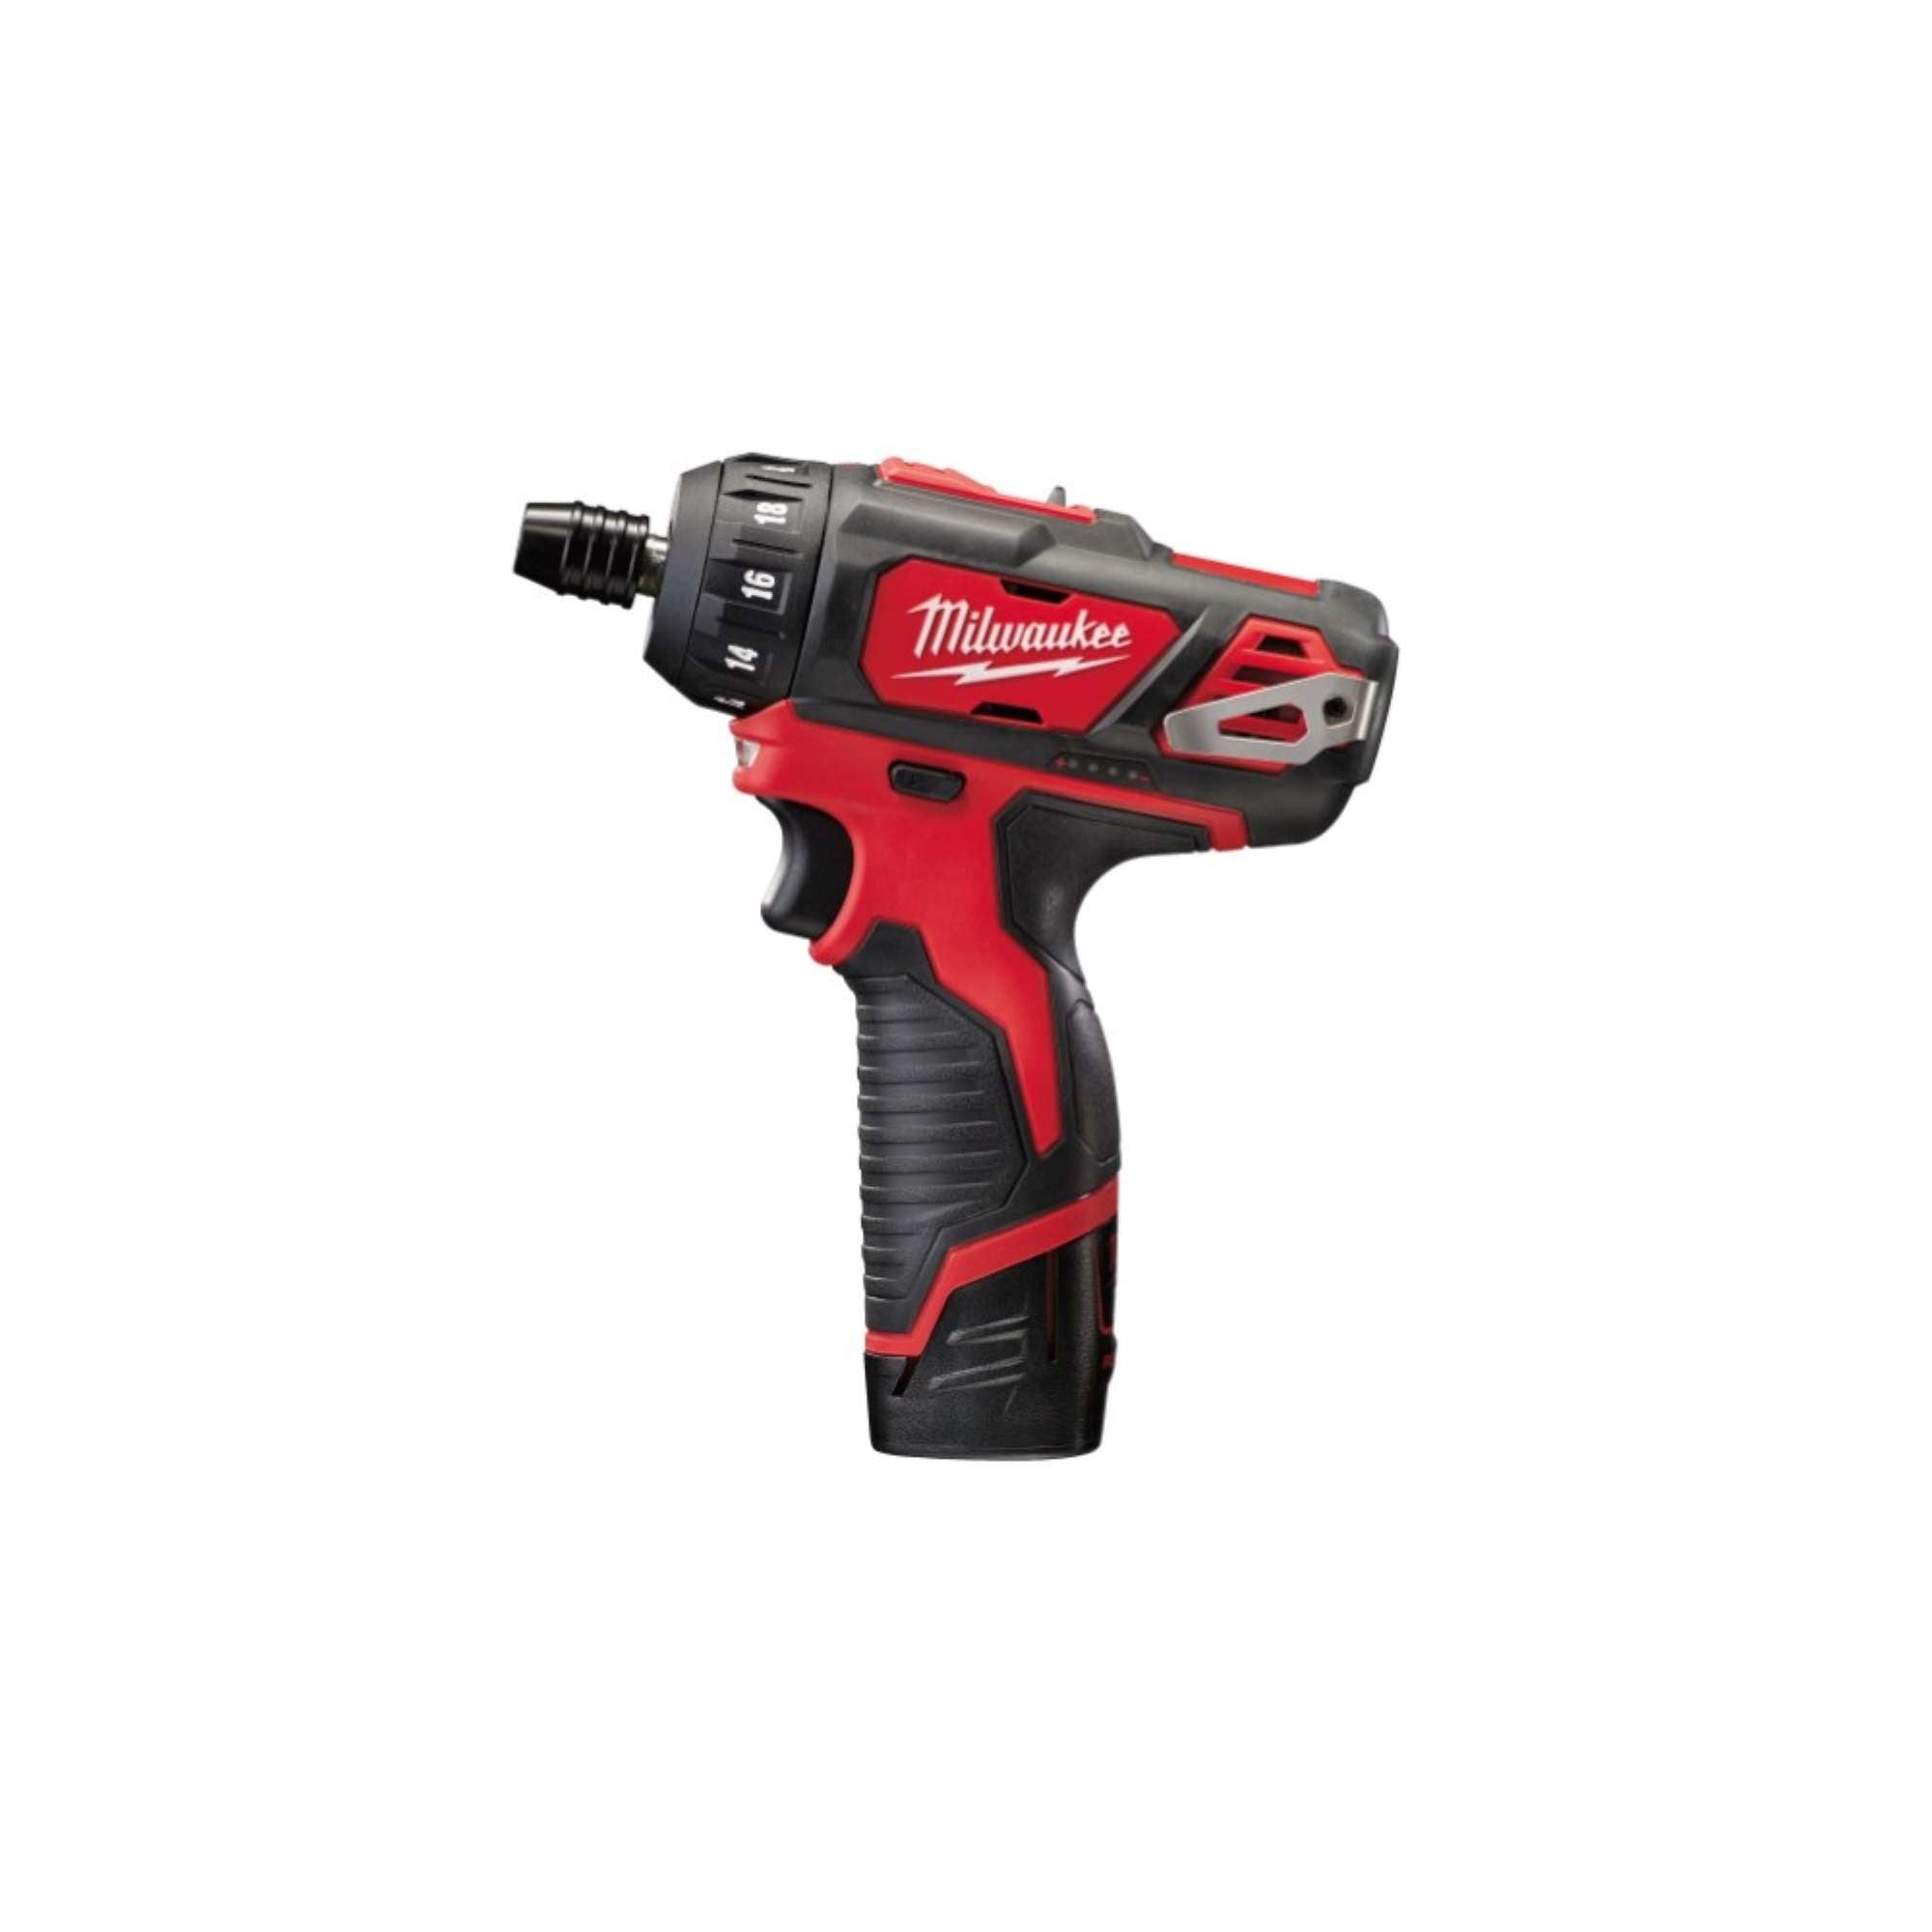 M12 screwdriver with two 2.0Ah batteries - Milwaukee 4933441900